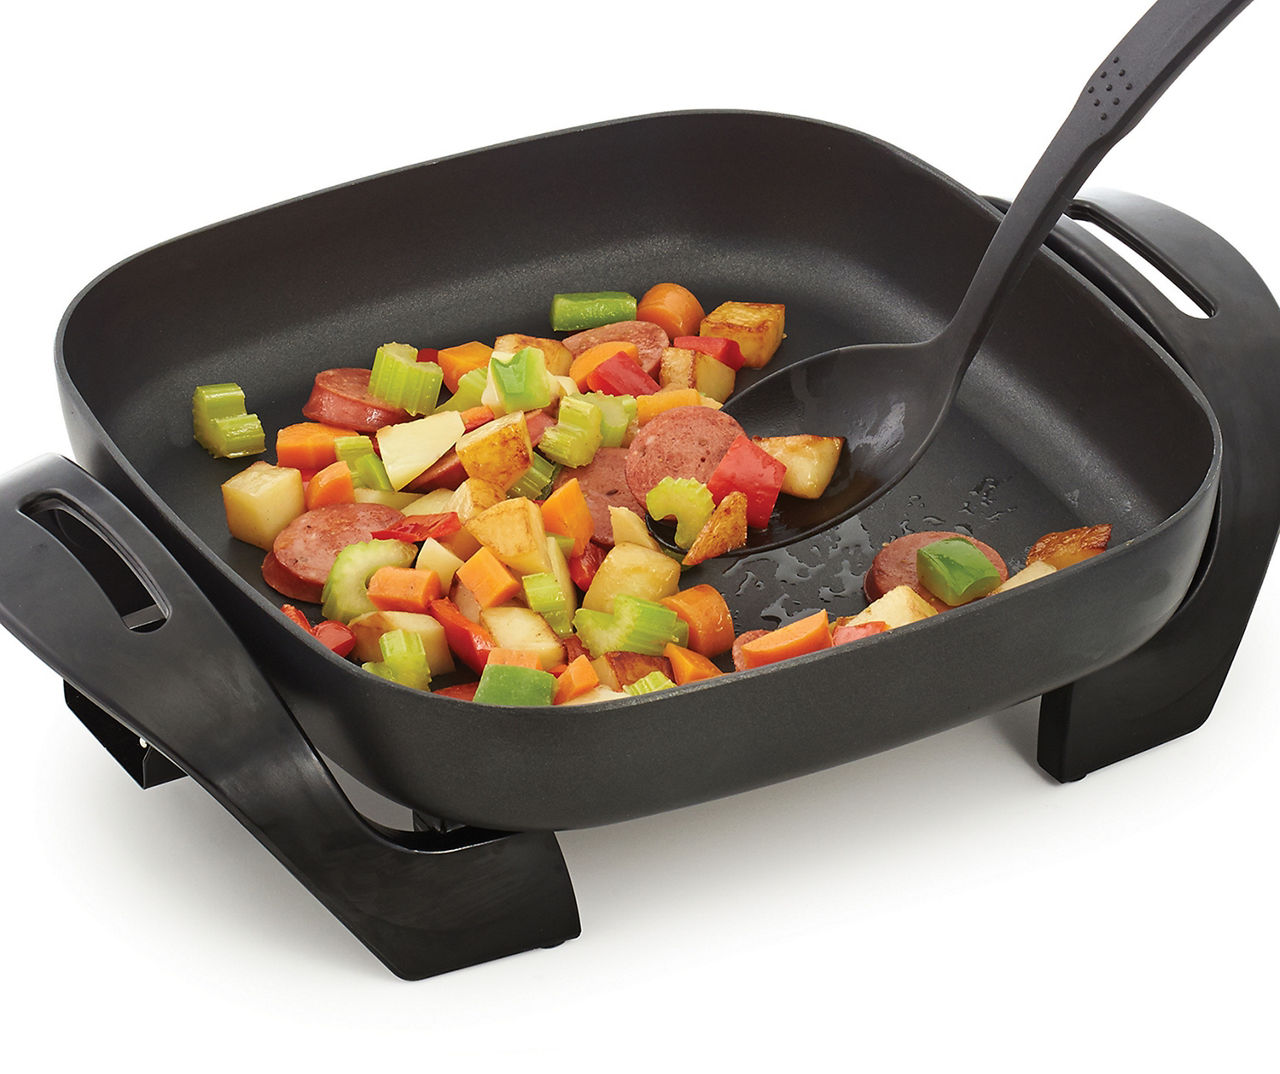 BELLA Electric Skillet and Frying Pan with Glass Lid, Nonstick Coating,  Cool Touch Handles, Removable Heating Probe, Dishwasher Safe, 12 x 12 inch